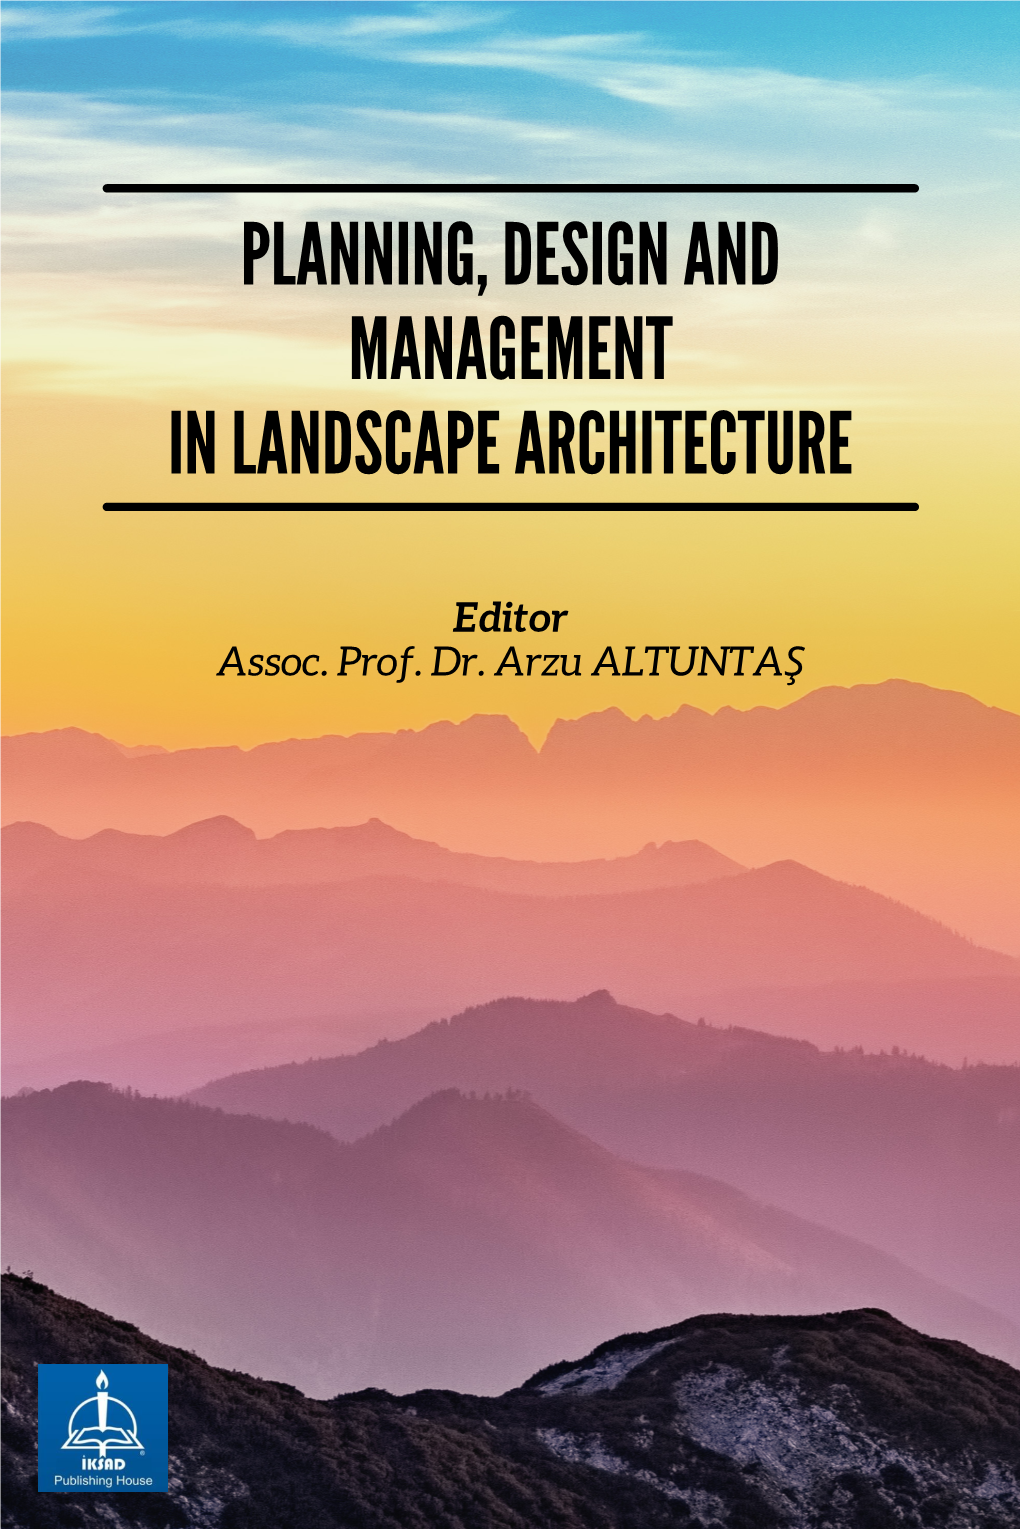 Planning, Design and Management in Landscape Architecture